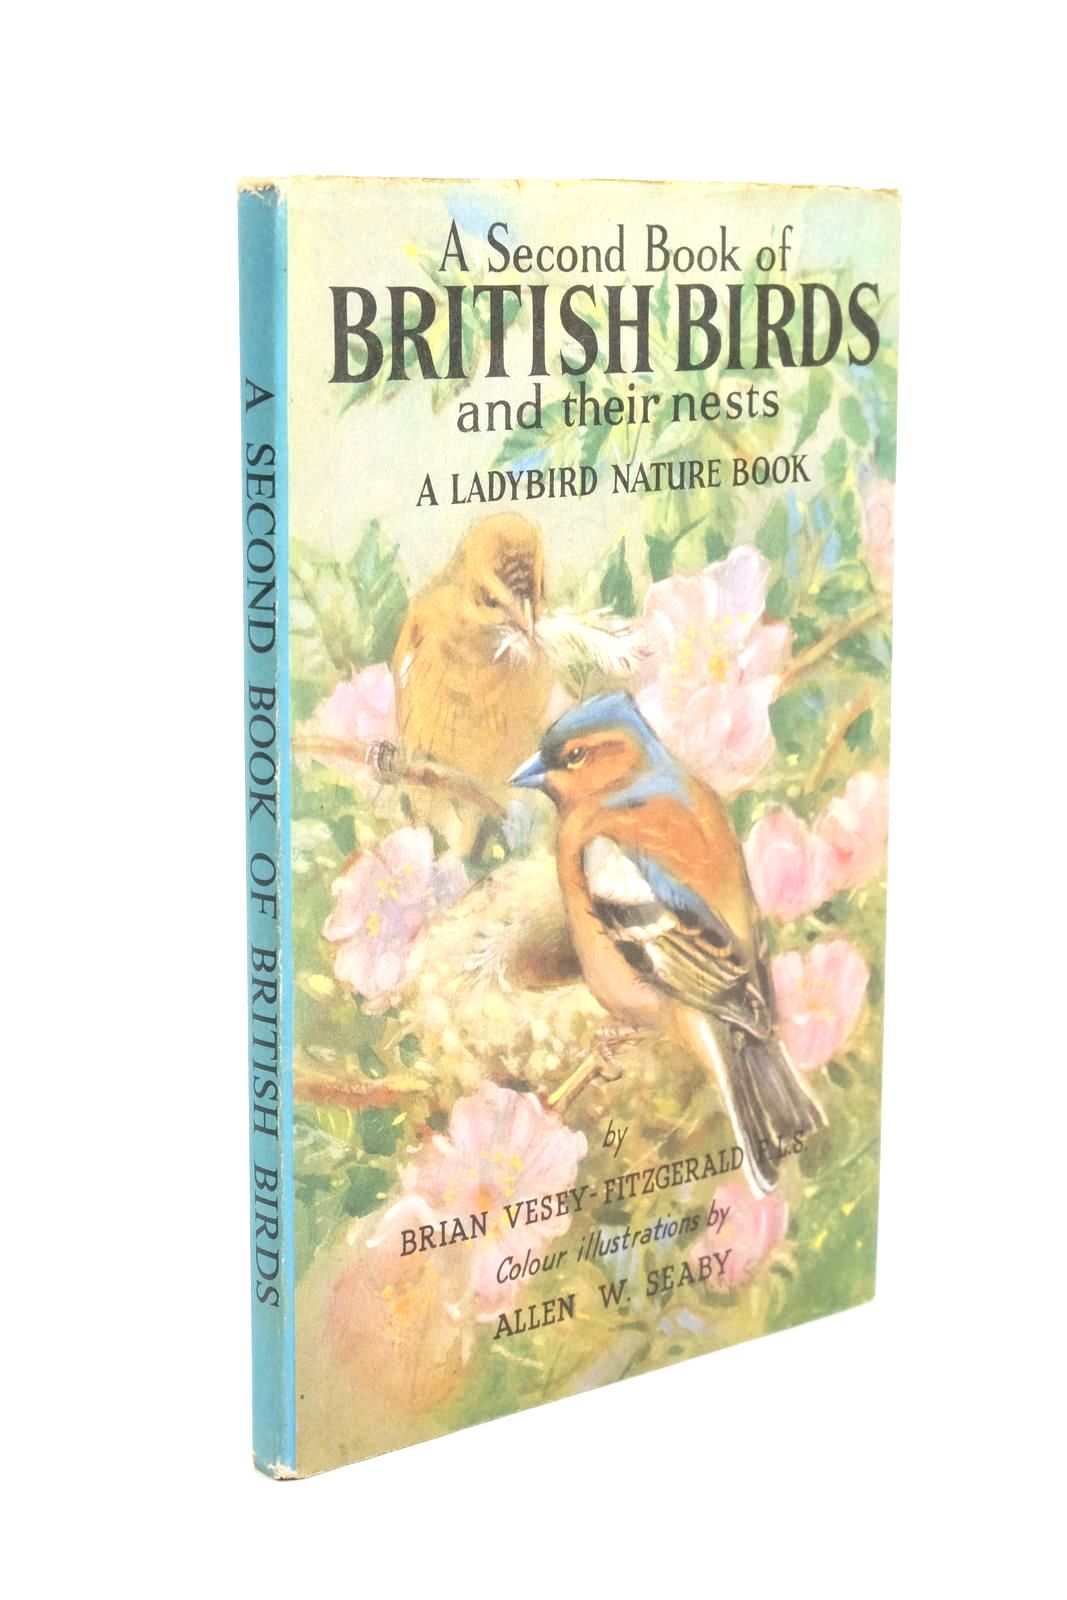 Photo of A SECOND BOOK OF BRITISH BIRDS AND THEIR NESTS written by Vesey-Fitzgerald, Brian illustrated by Seaby, Allen W. published by Wills &amp; Hepworth Ltd. (STOCK CODE: 1322142)  for sale by Stella & Rose's Books